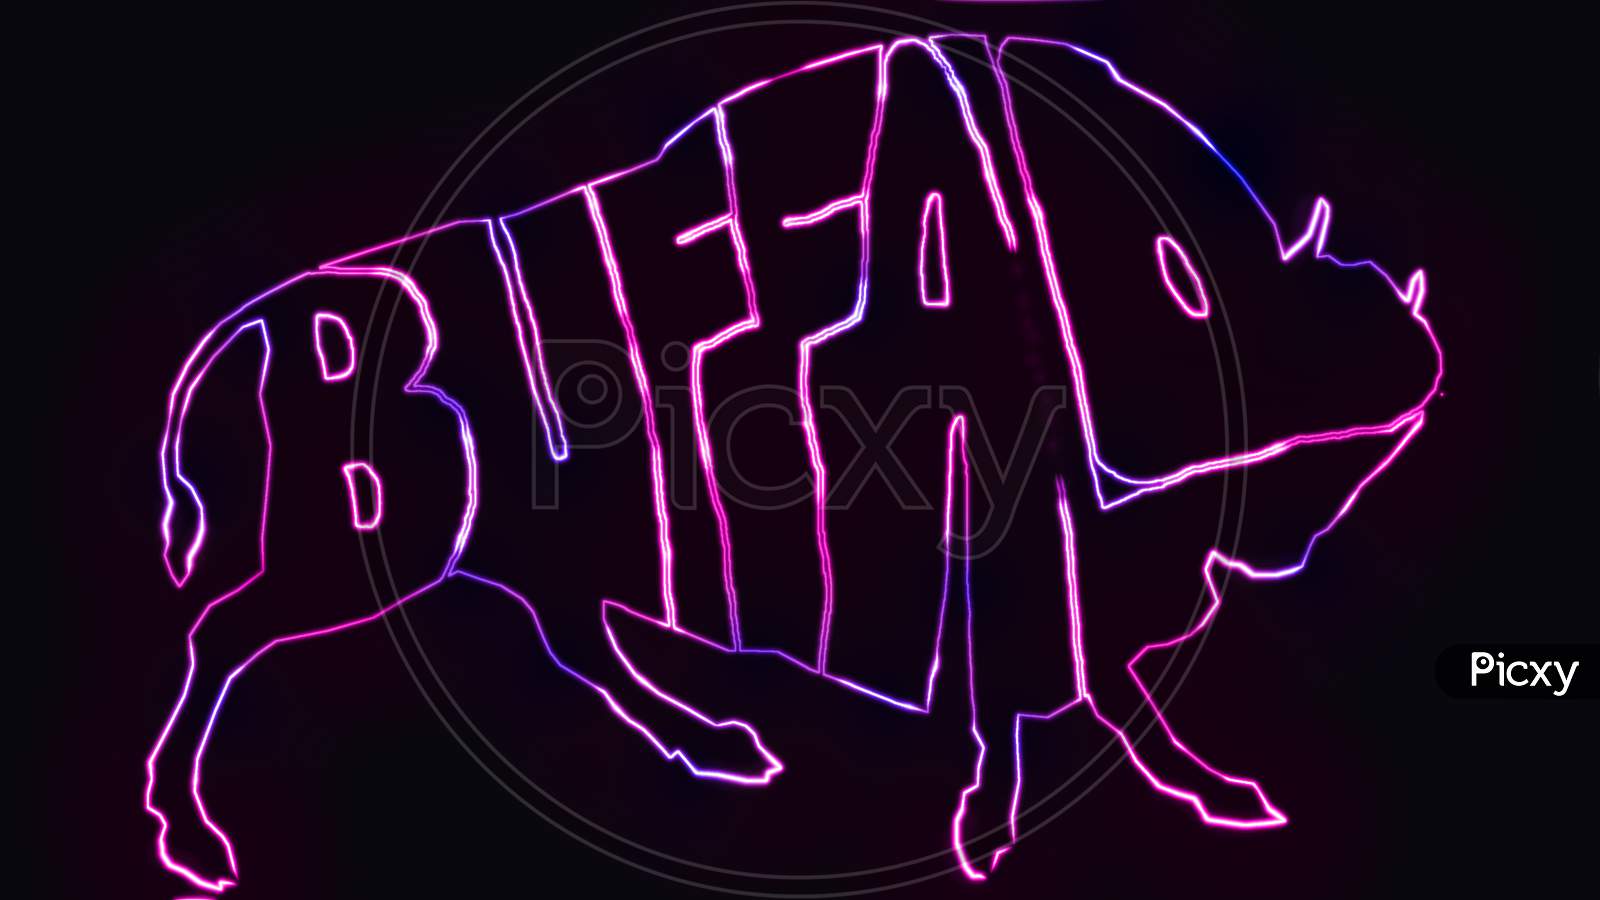 The text BUFFALO written in the shape of buffalo with neon light effect. animal text outline with neon light effect.